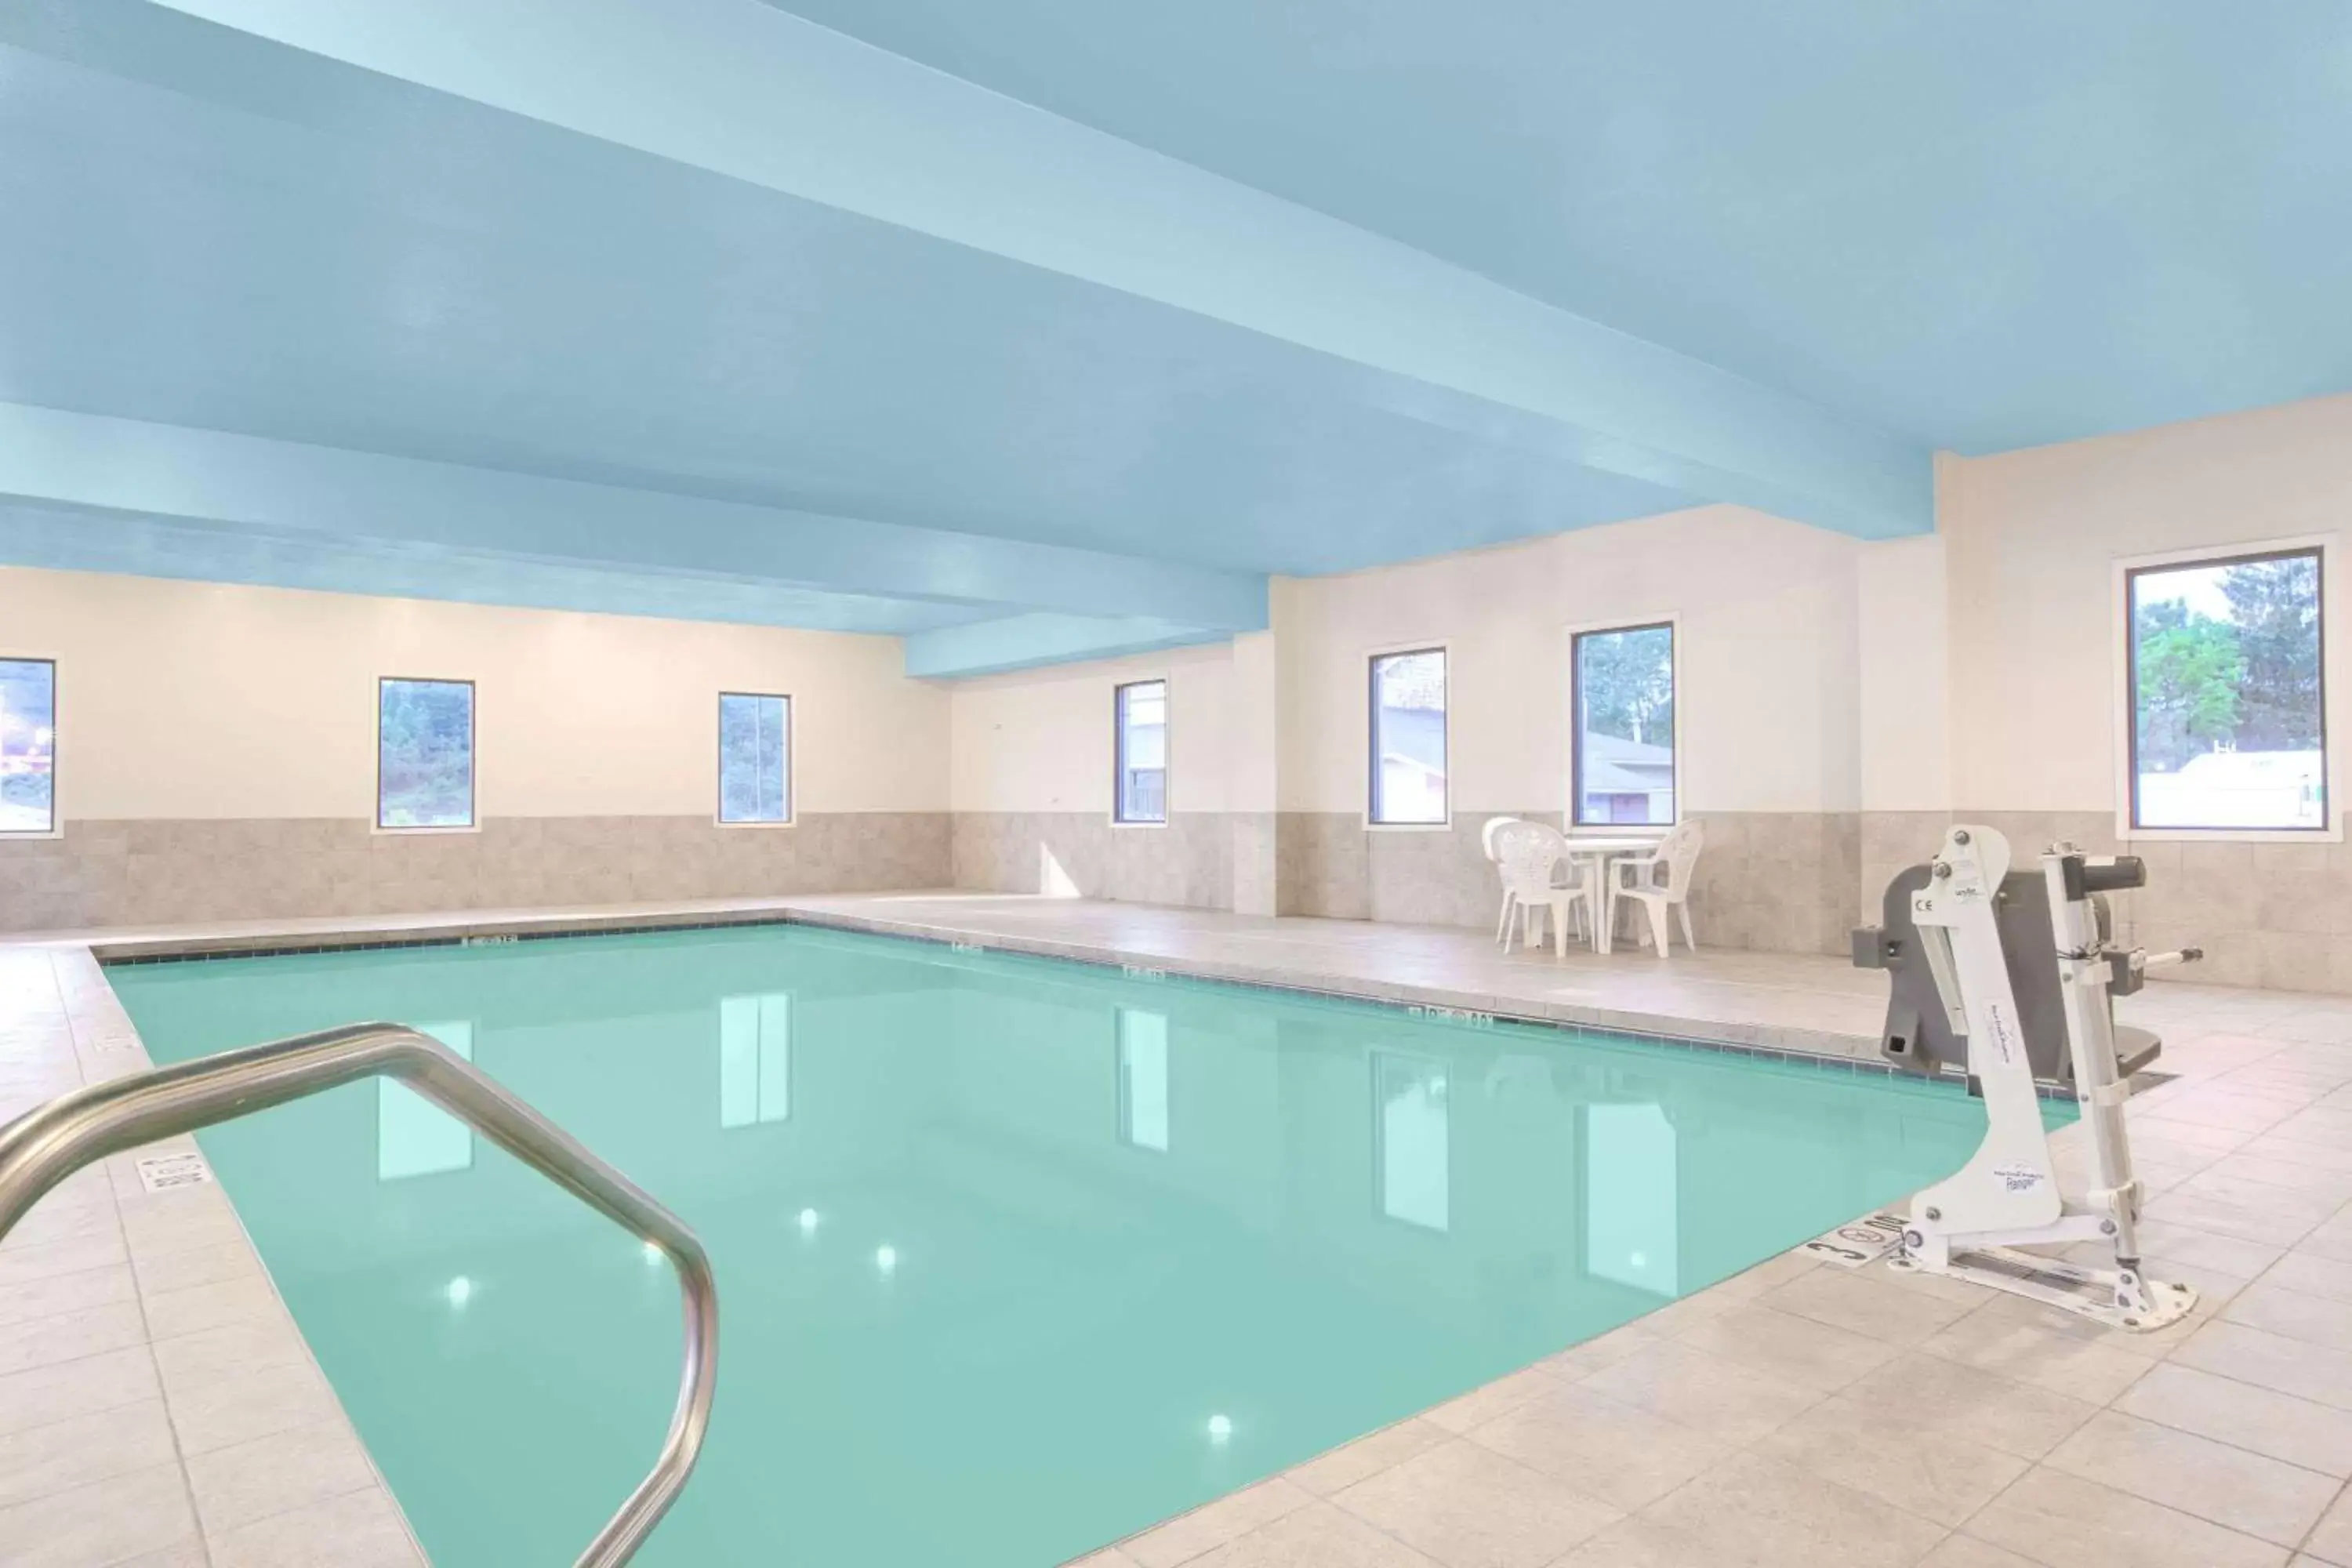 On site, Swimming Pool in Days Inn by Wyndham Mount Hope